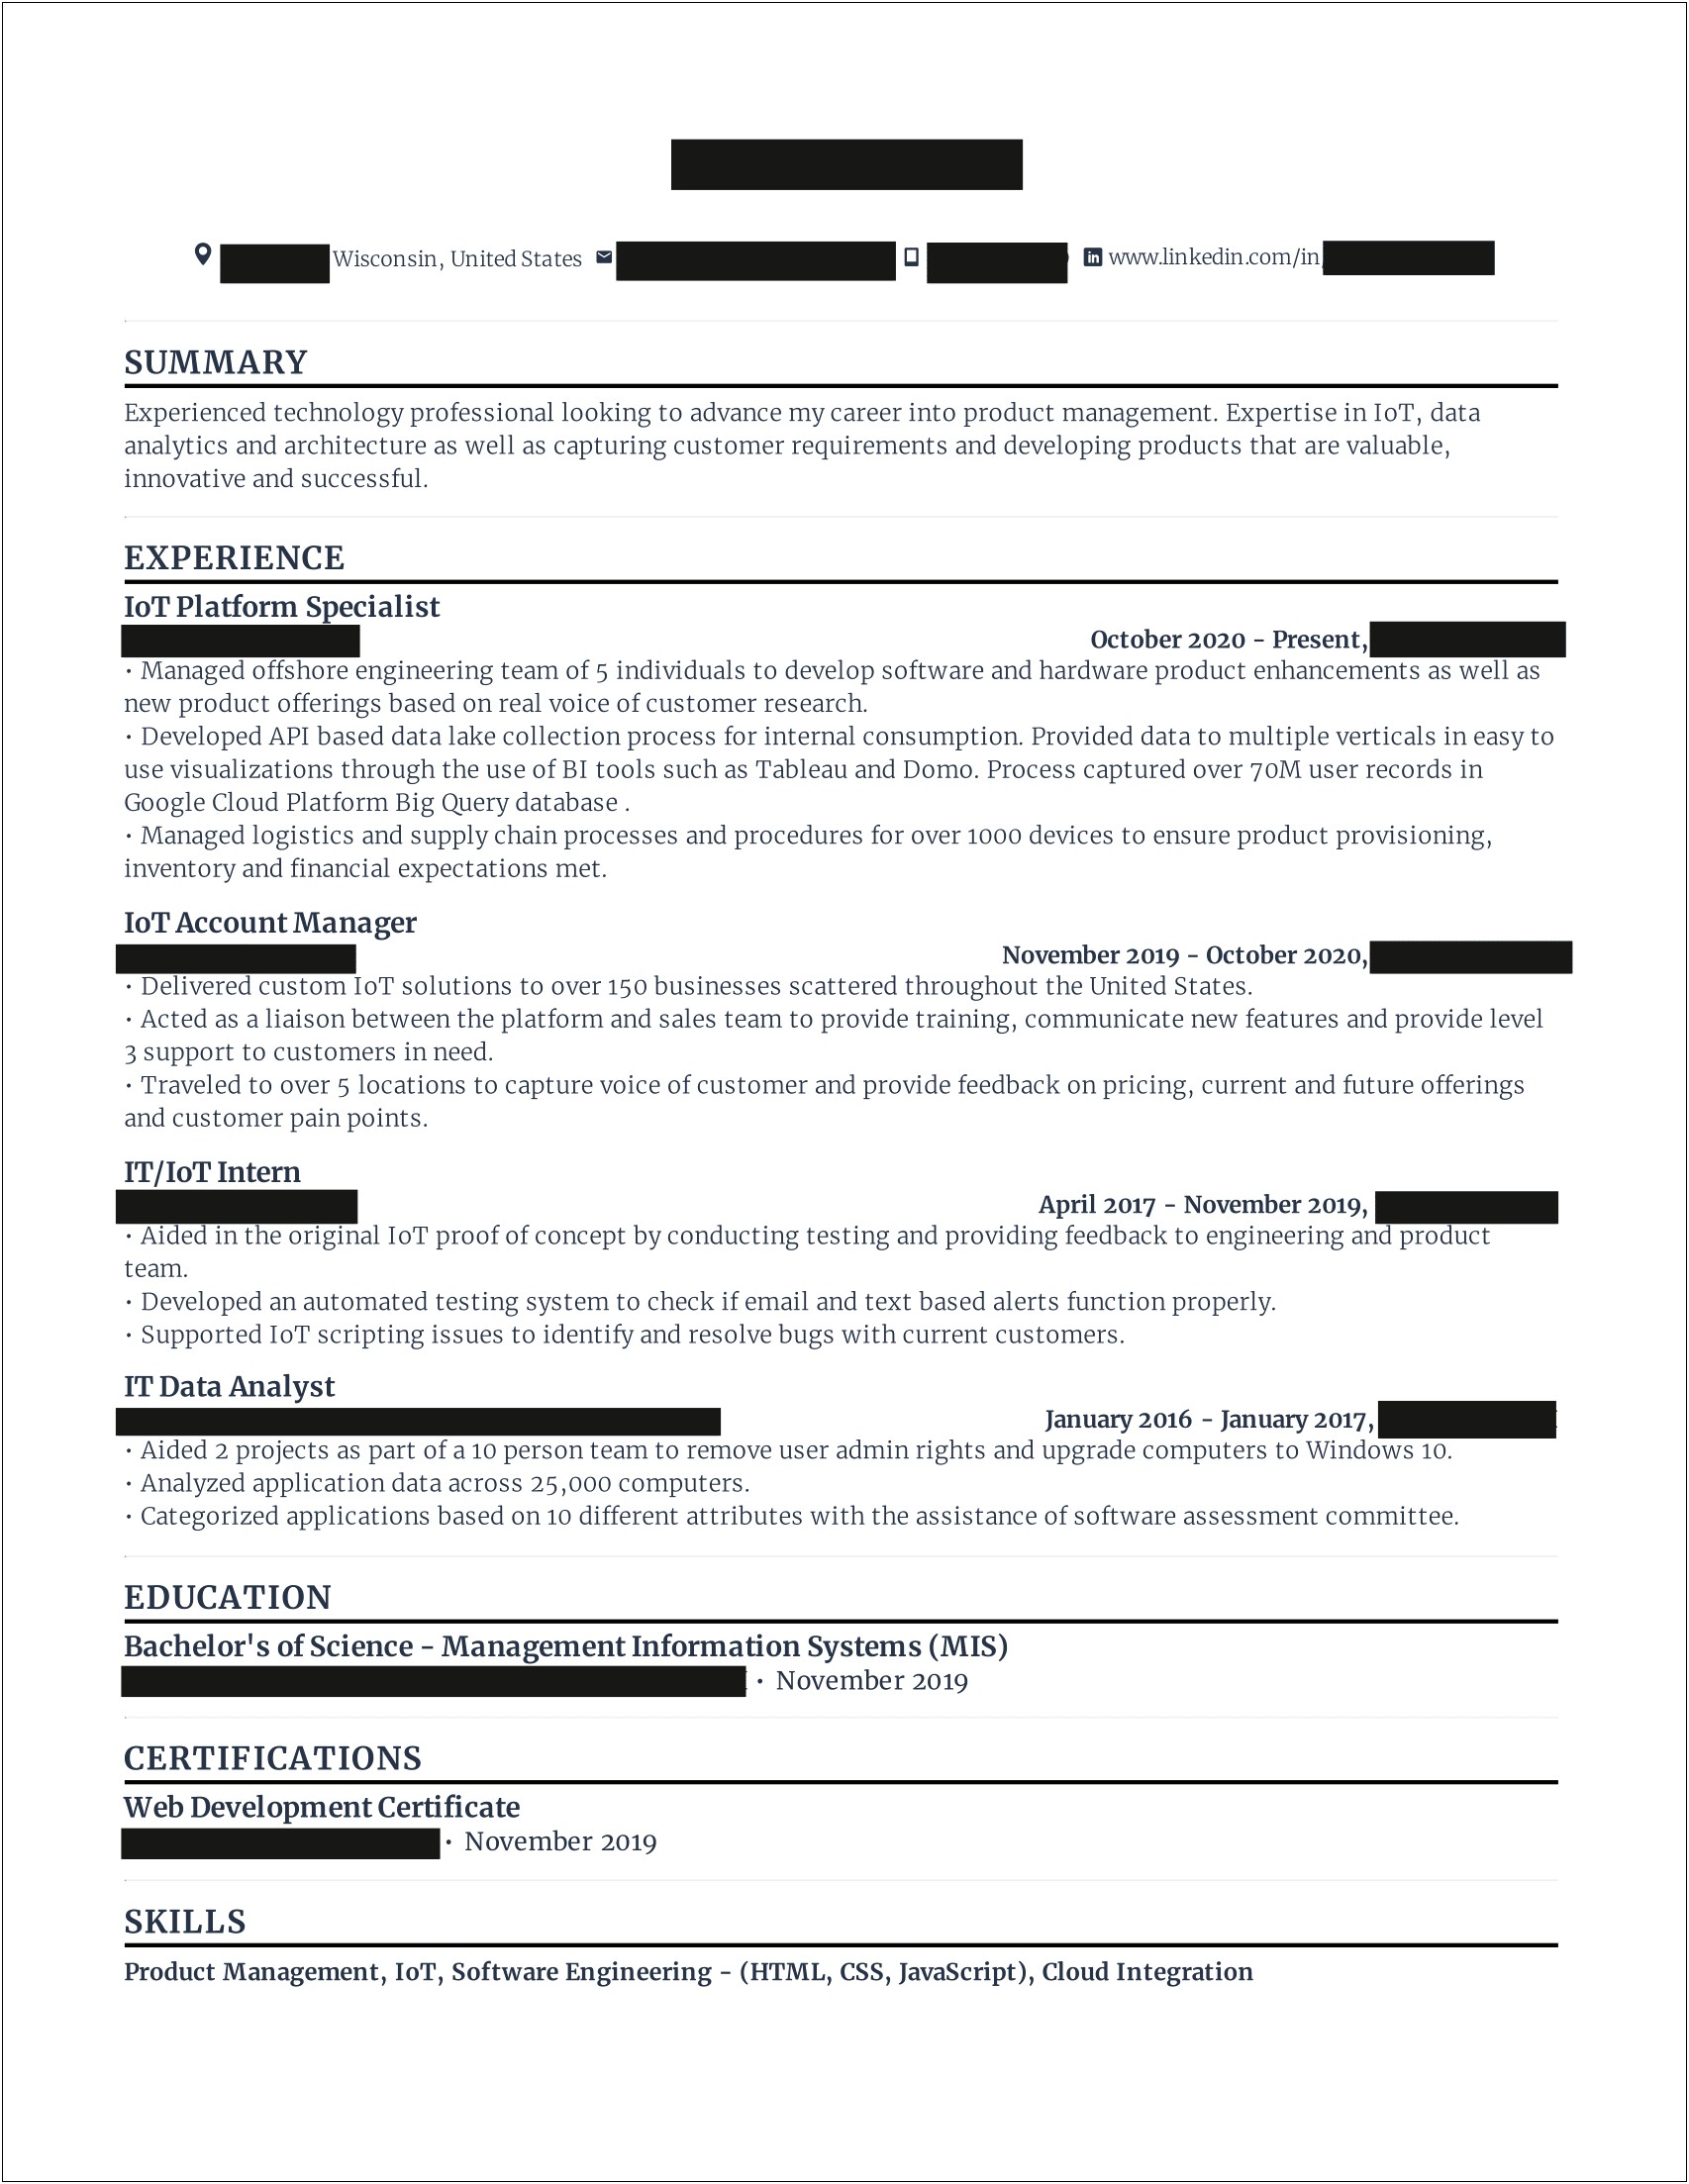 Check Cashing Store Manager Resume